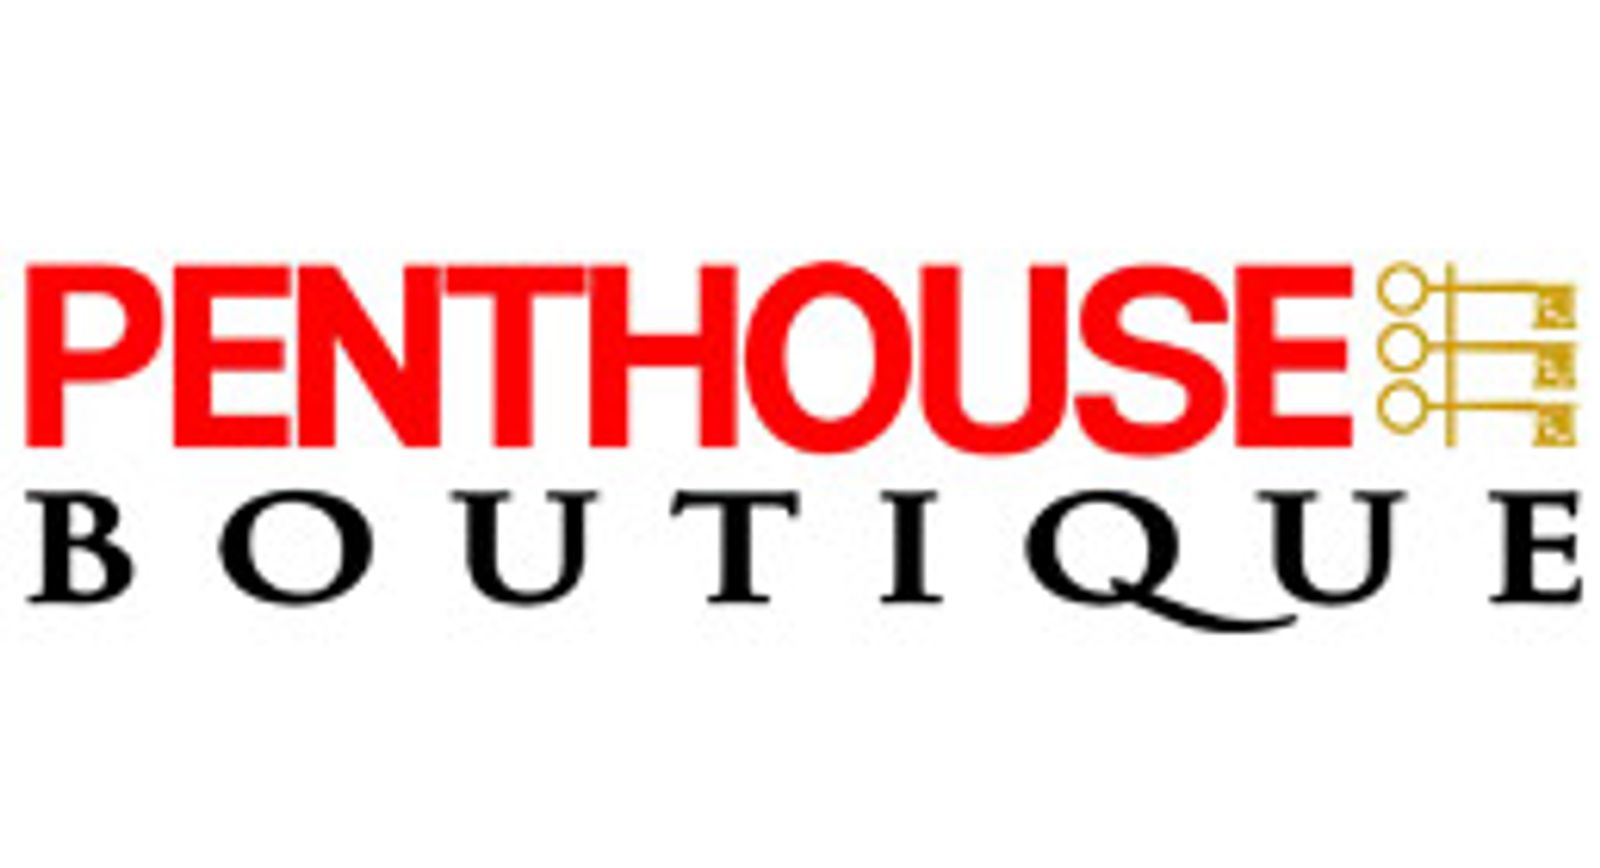 Penthouse Enters Retail Market With Licensing Deal With Horizon Media For Penthouse Boutique